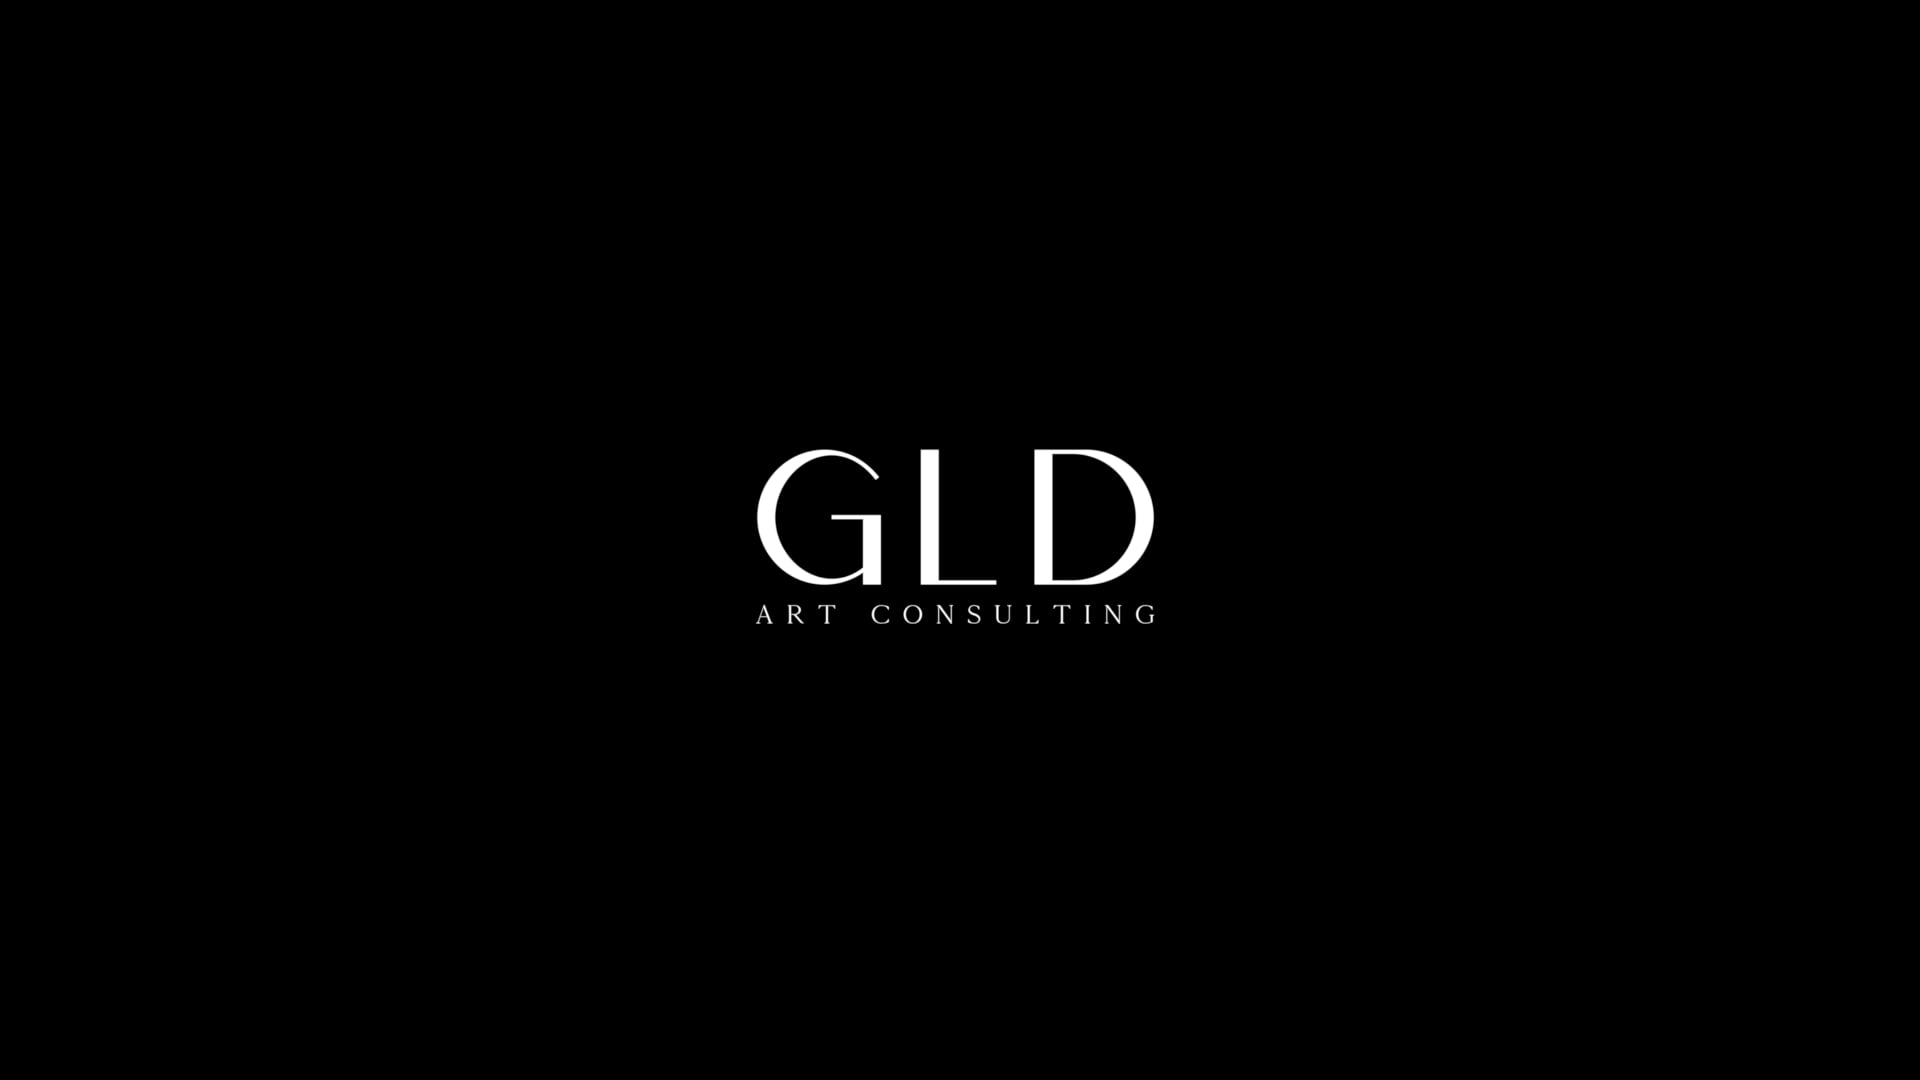 GLD-Art consulting